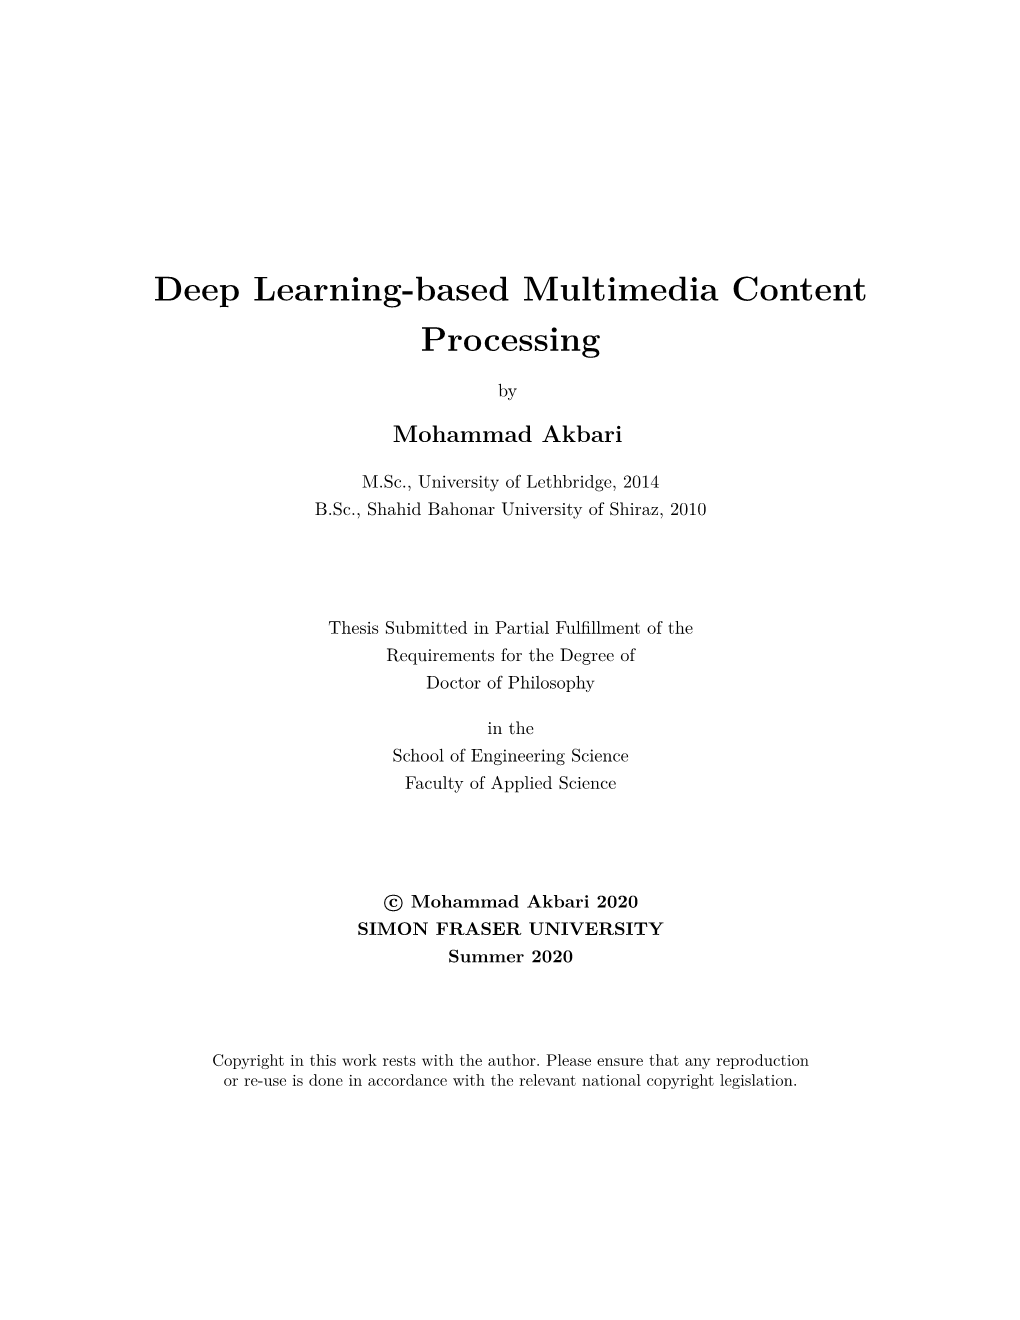 Deep Learning-Based Multimedia Content Processing